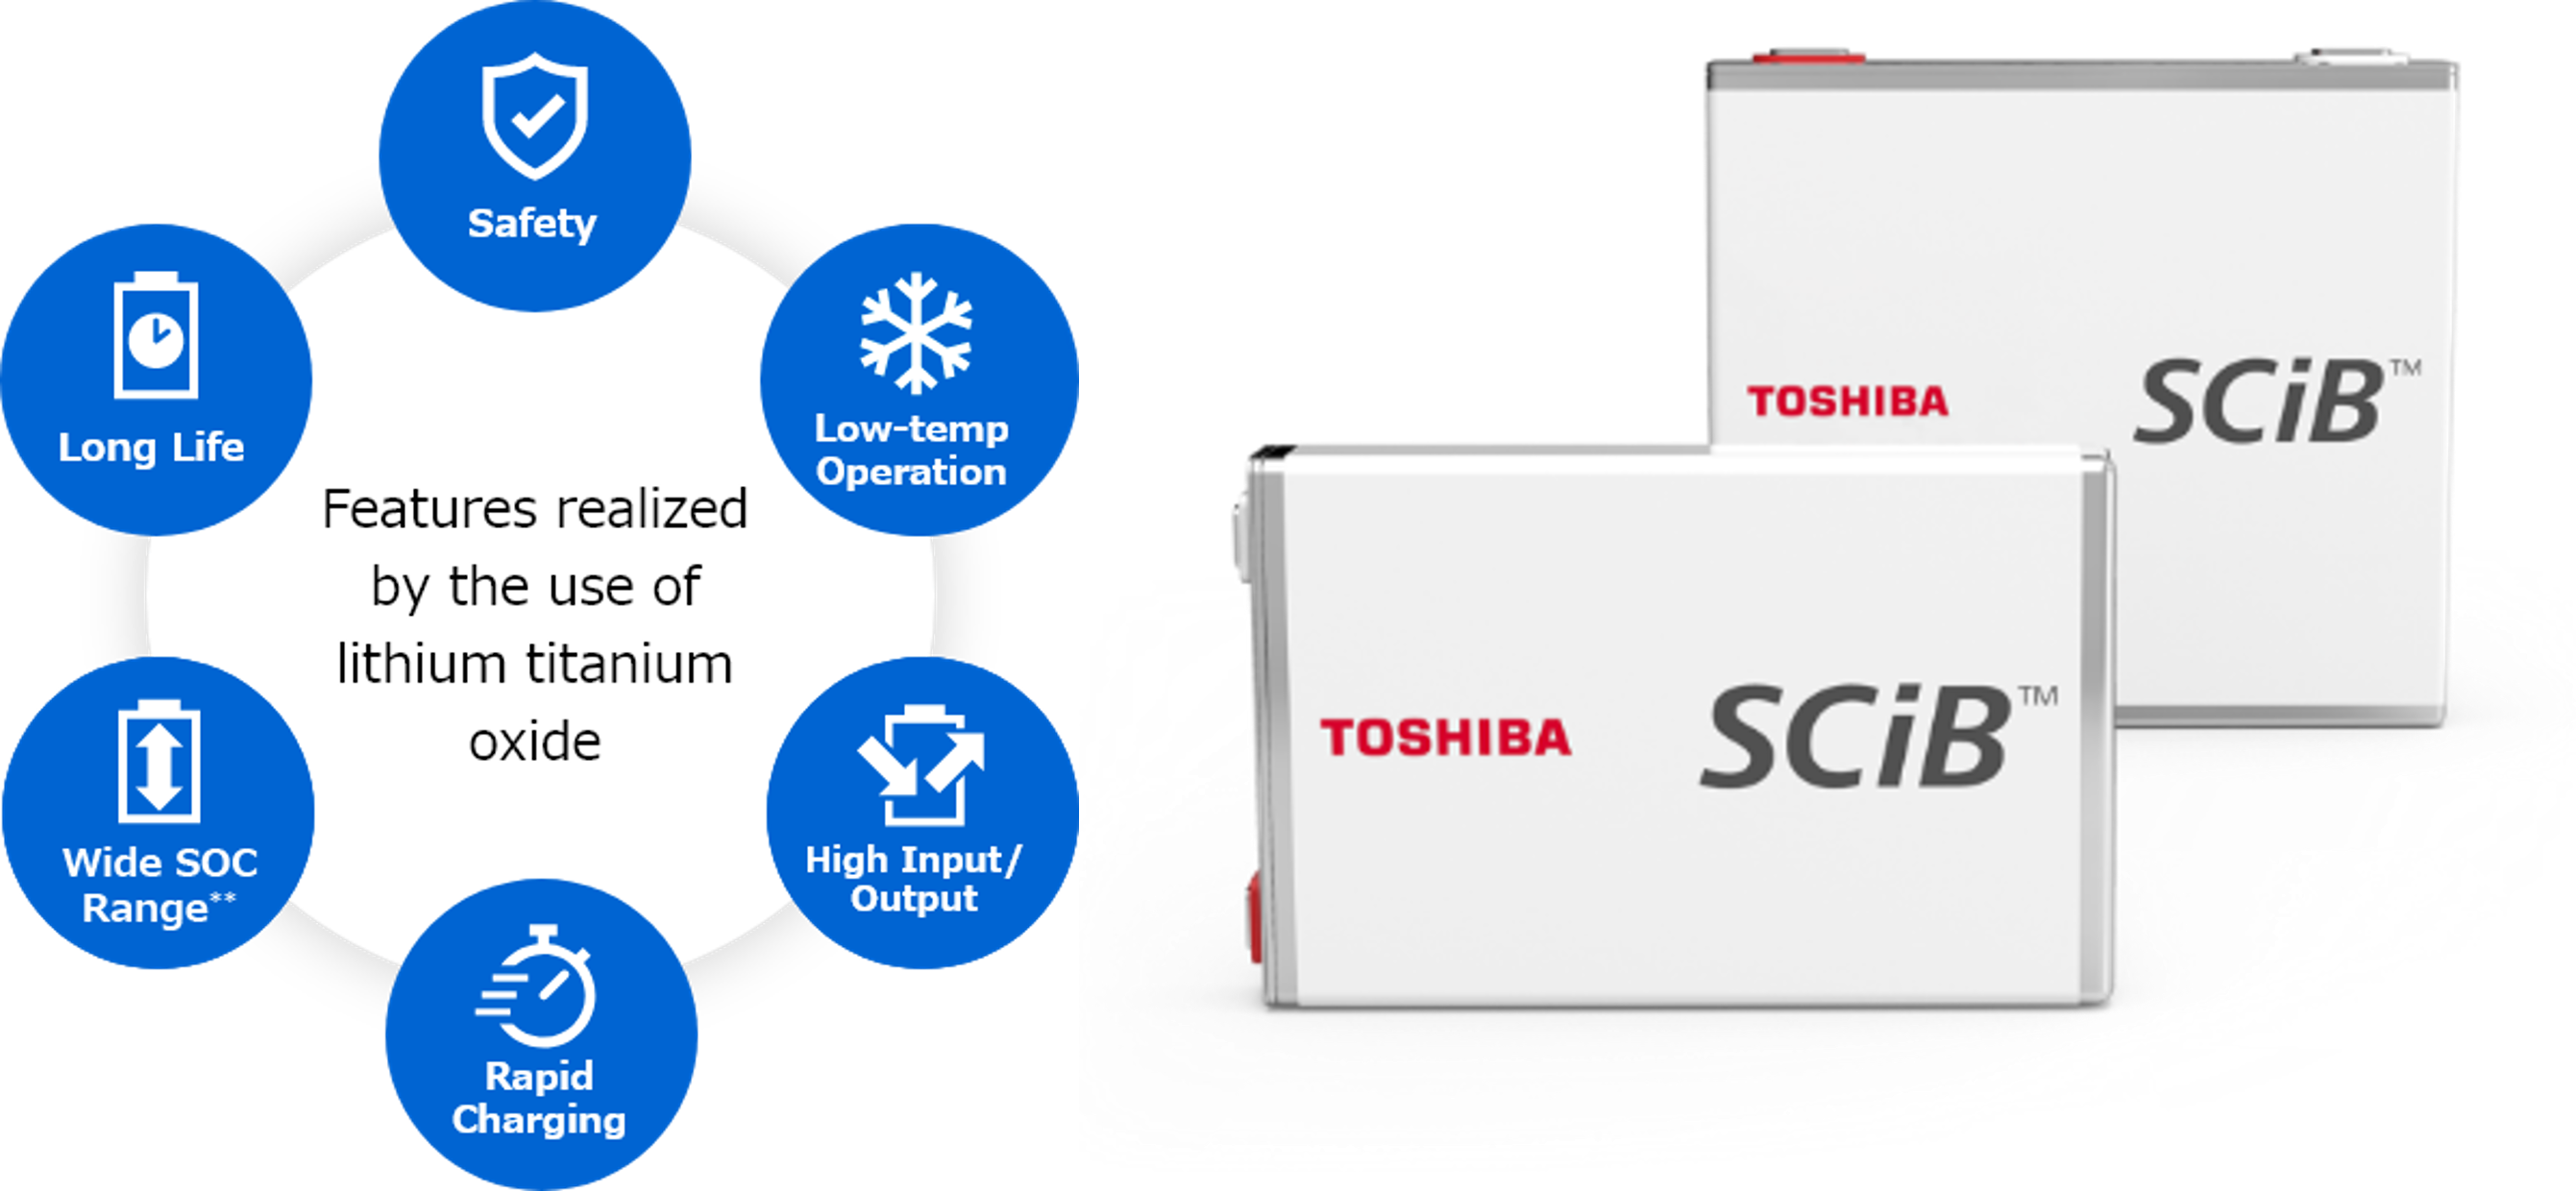 The SCiB™ rechargeable lithium-ion battery, widely used for applications that include automobiles and industrial equipment